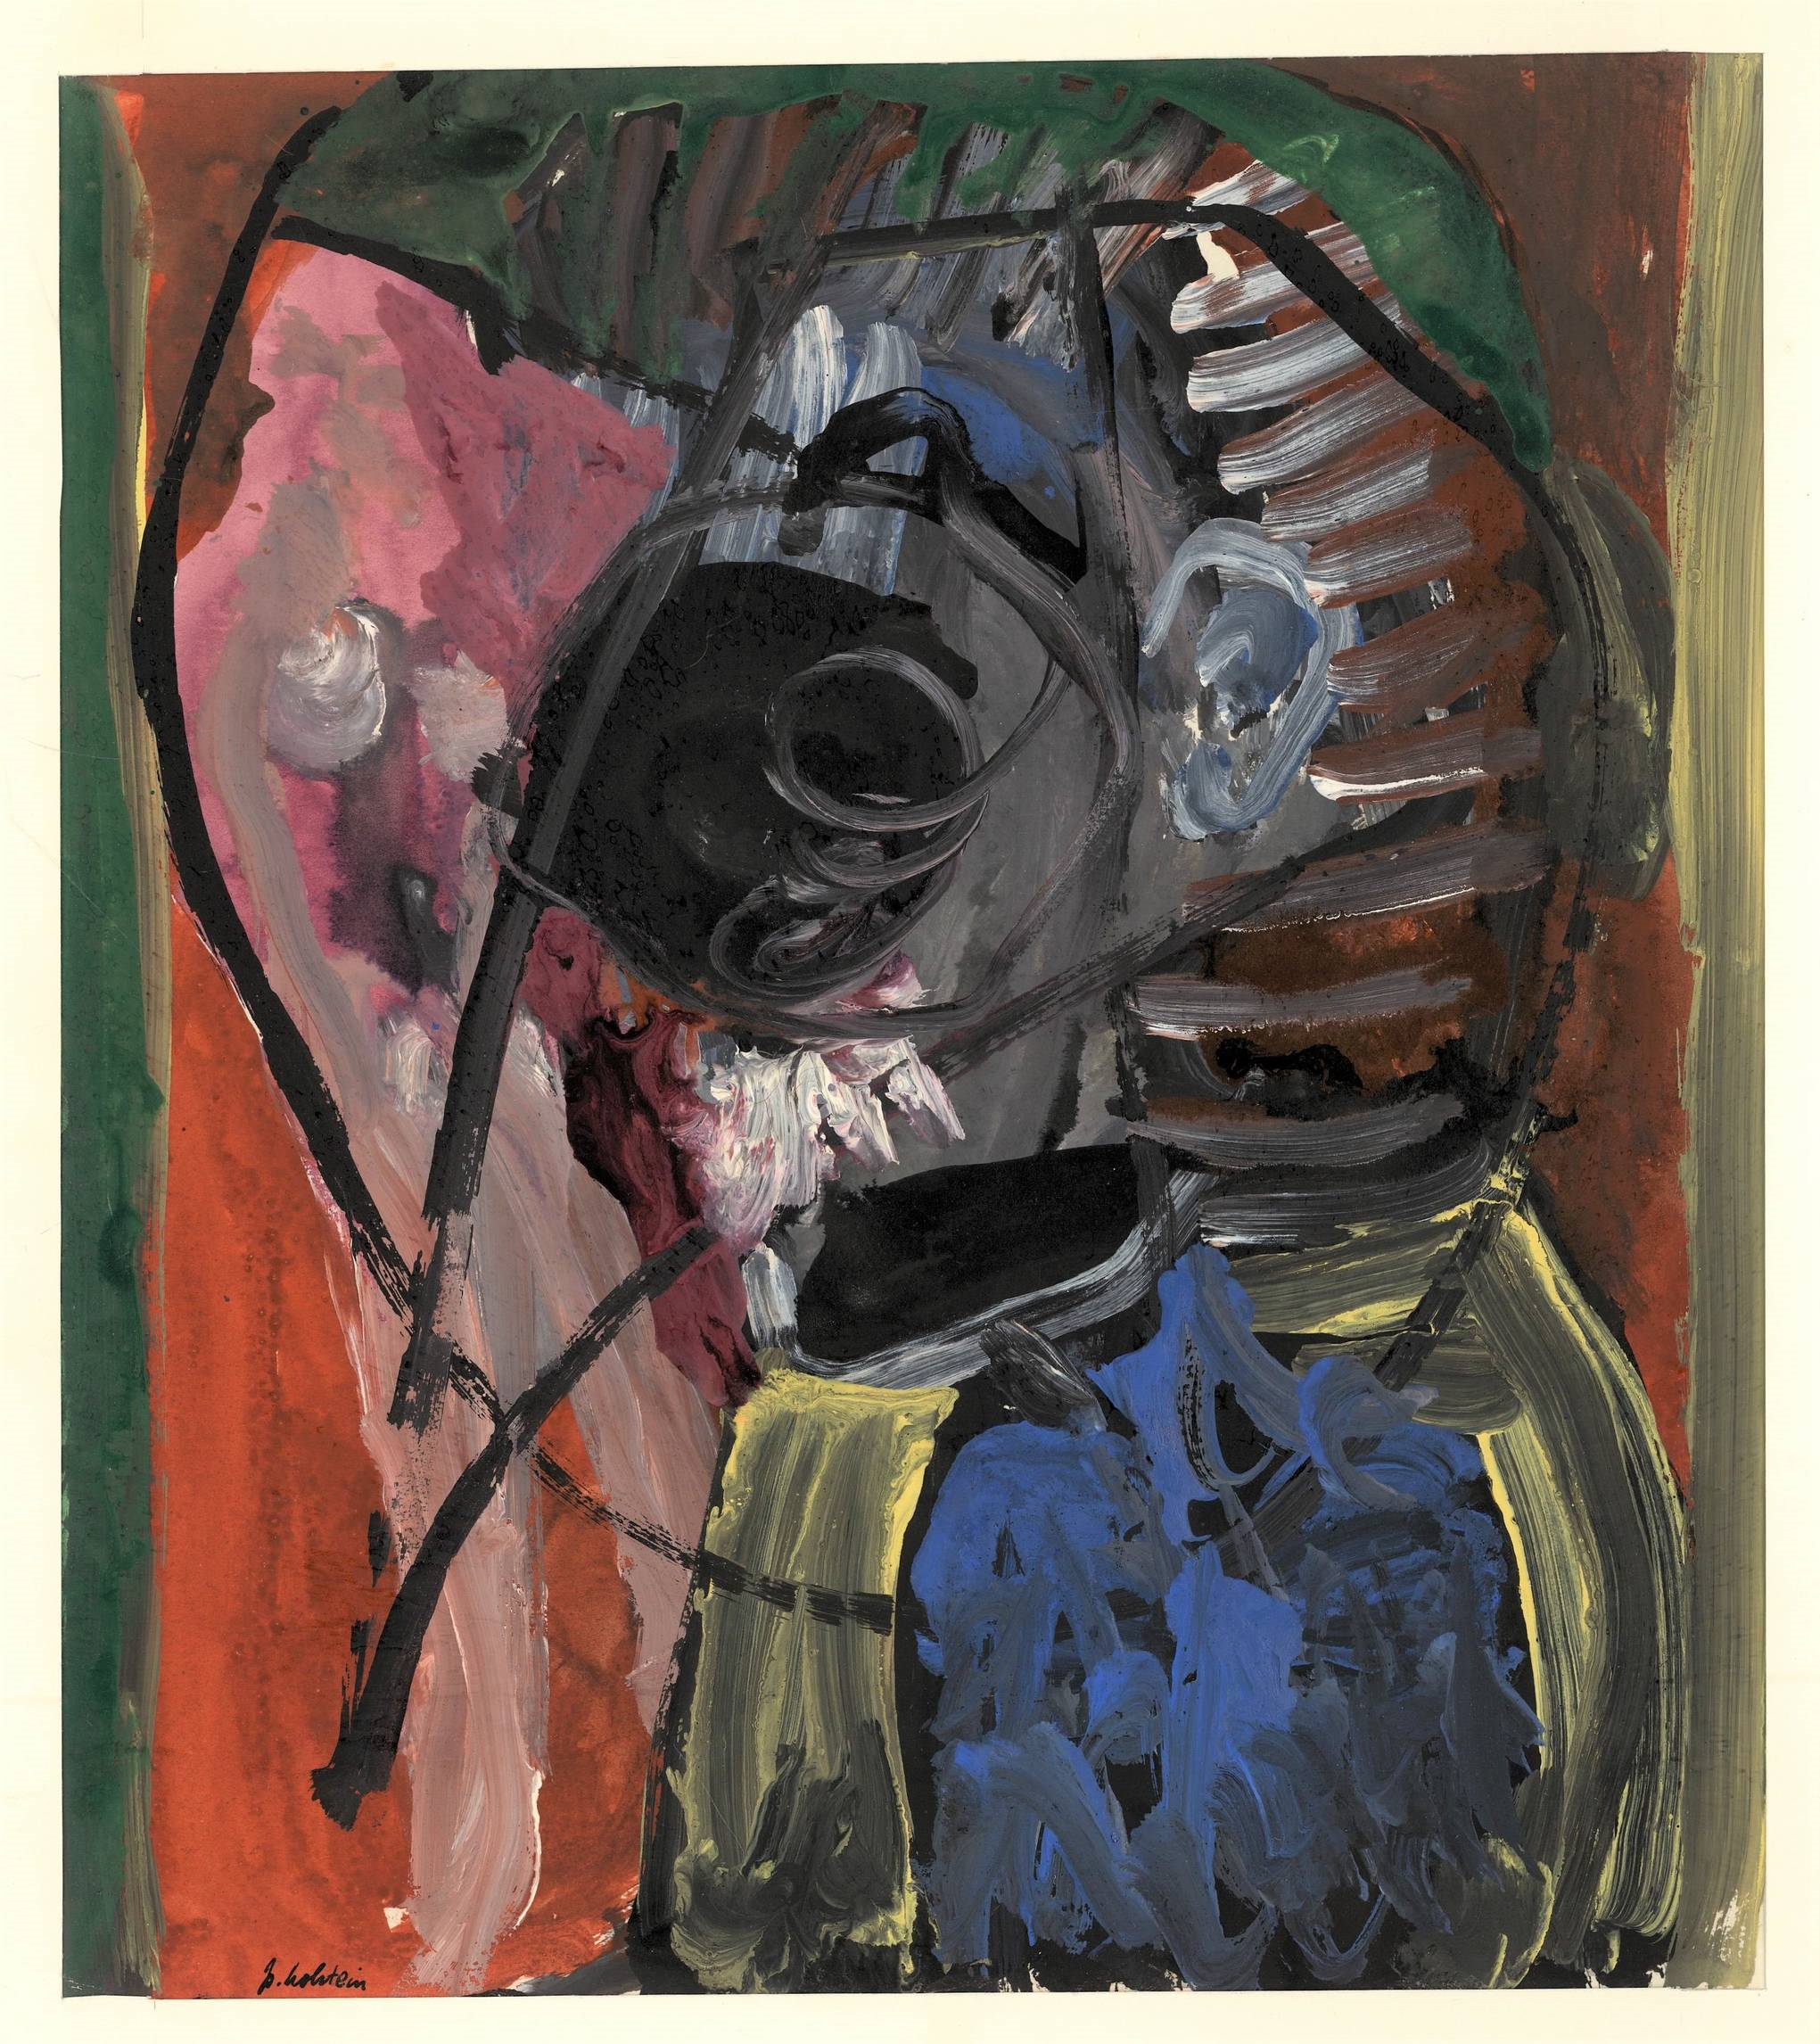 Artwork by Pieter Holstein, Abstract composition; Untitled, Made of Mixed media, collage, gouache and watercolour; gouache drawing